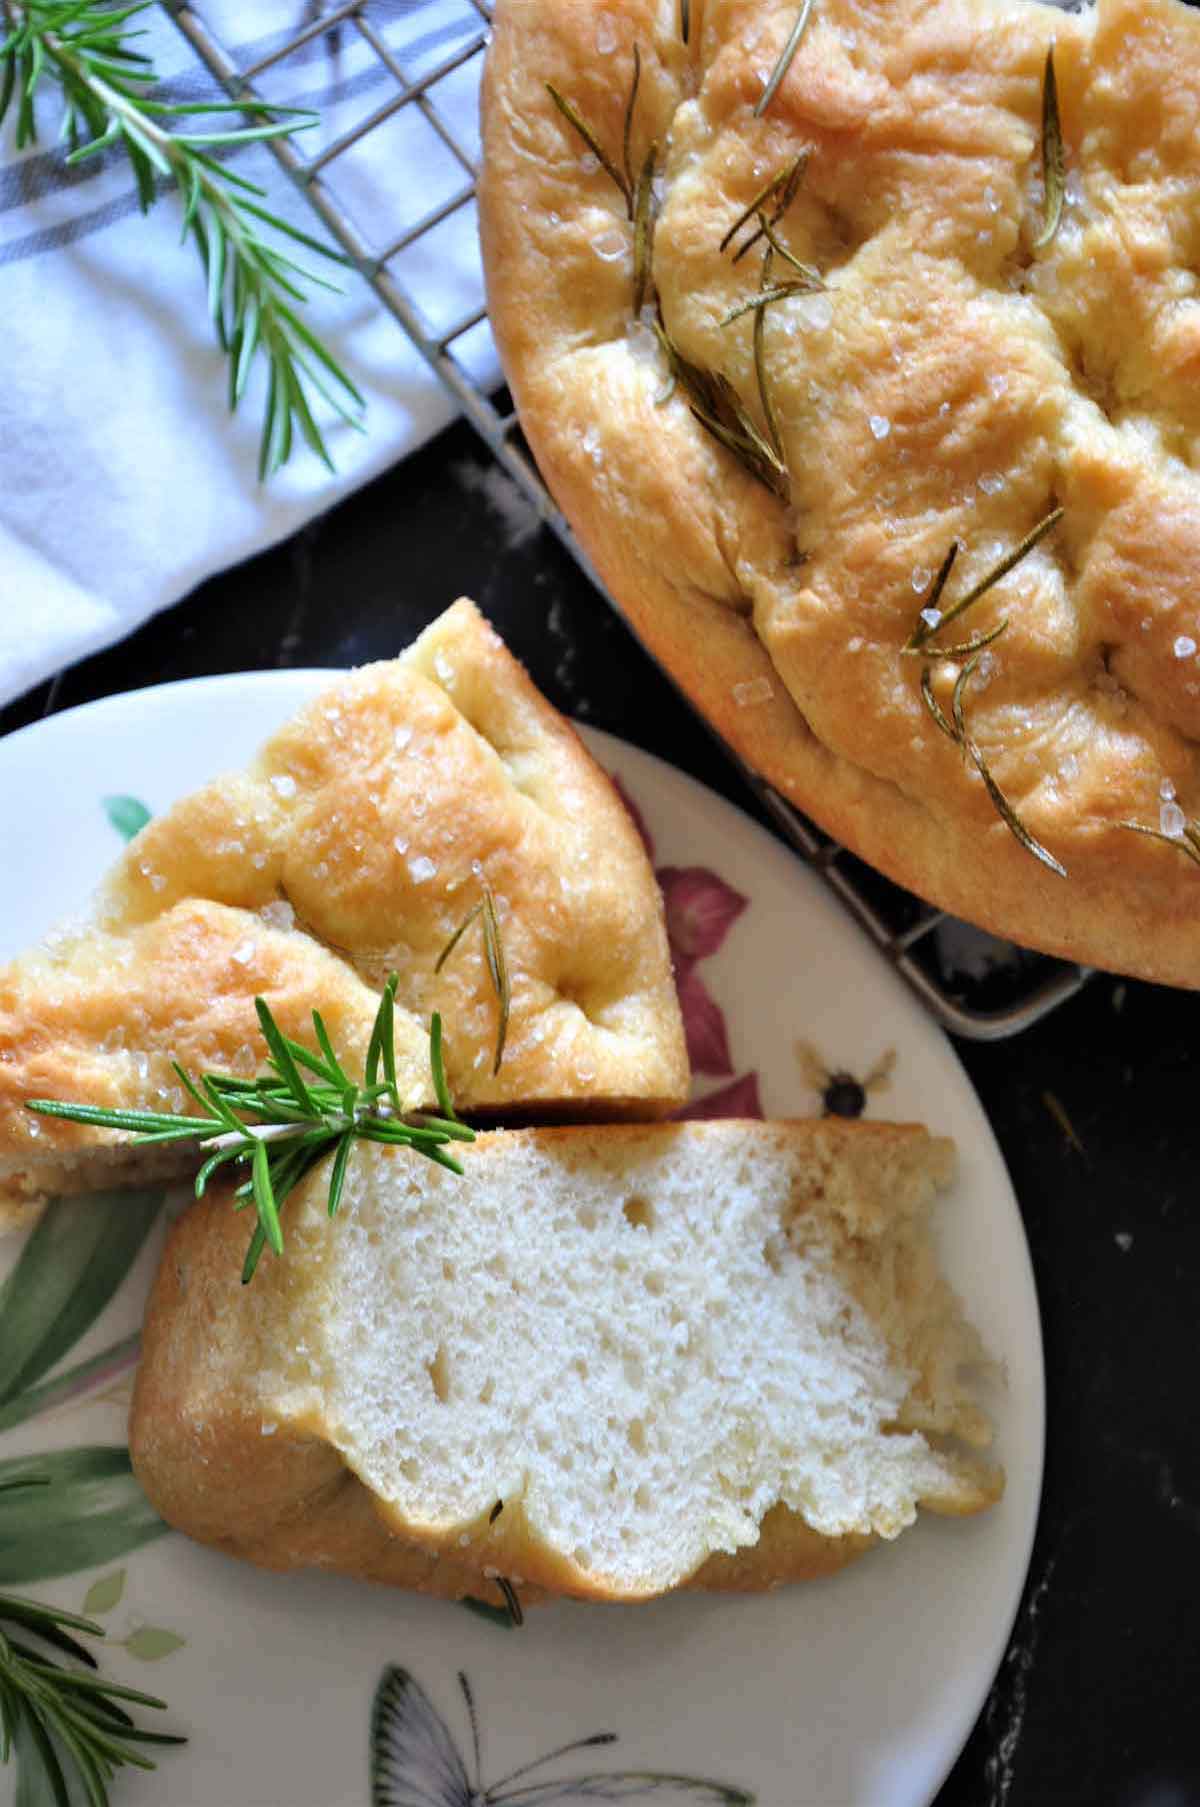 two triangles of focaccia bread with the remaining bread in background.